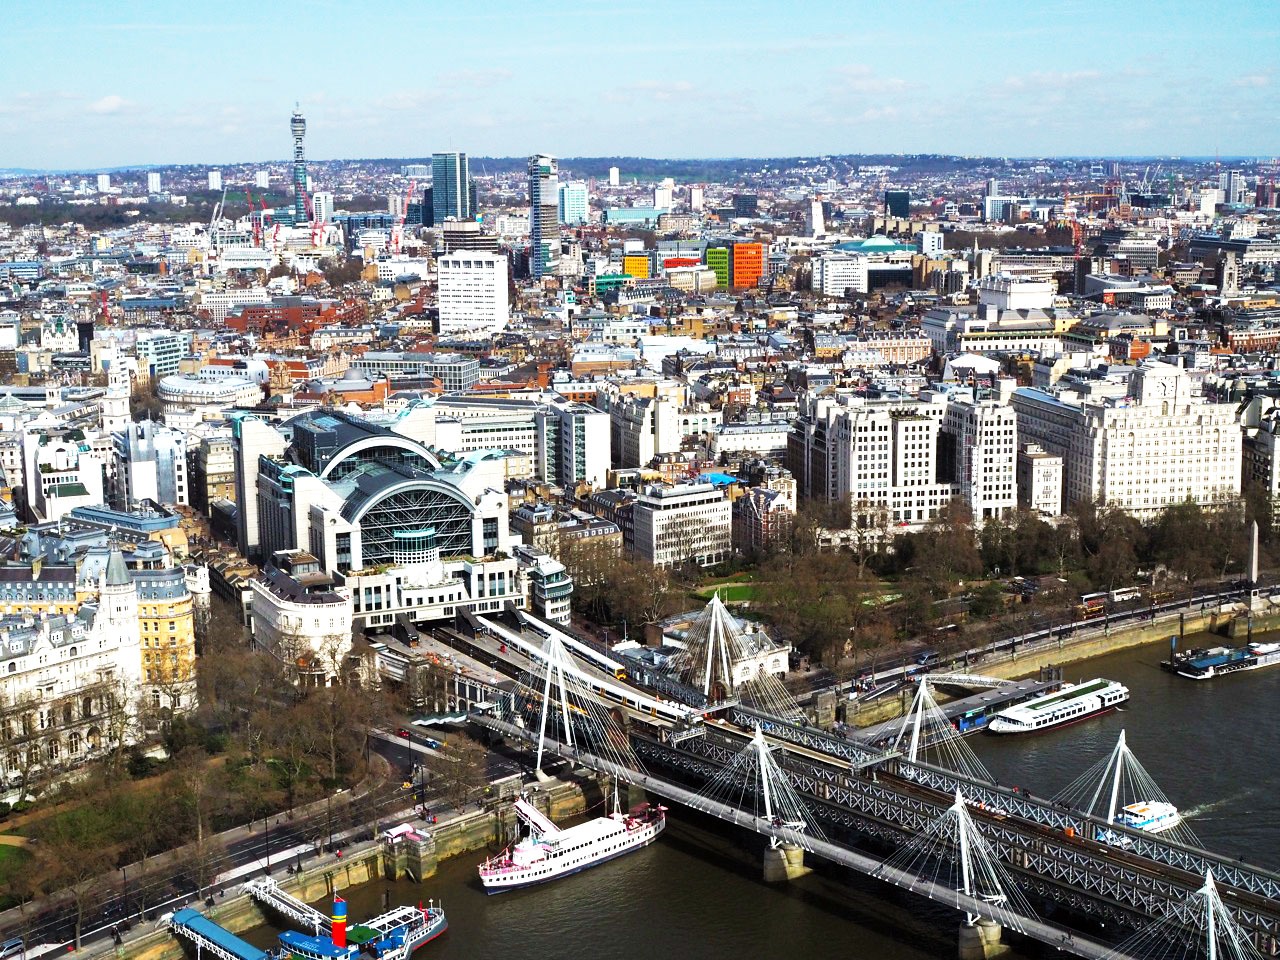 The View from the London Eye